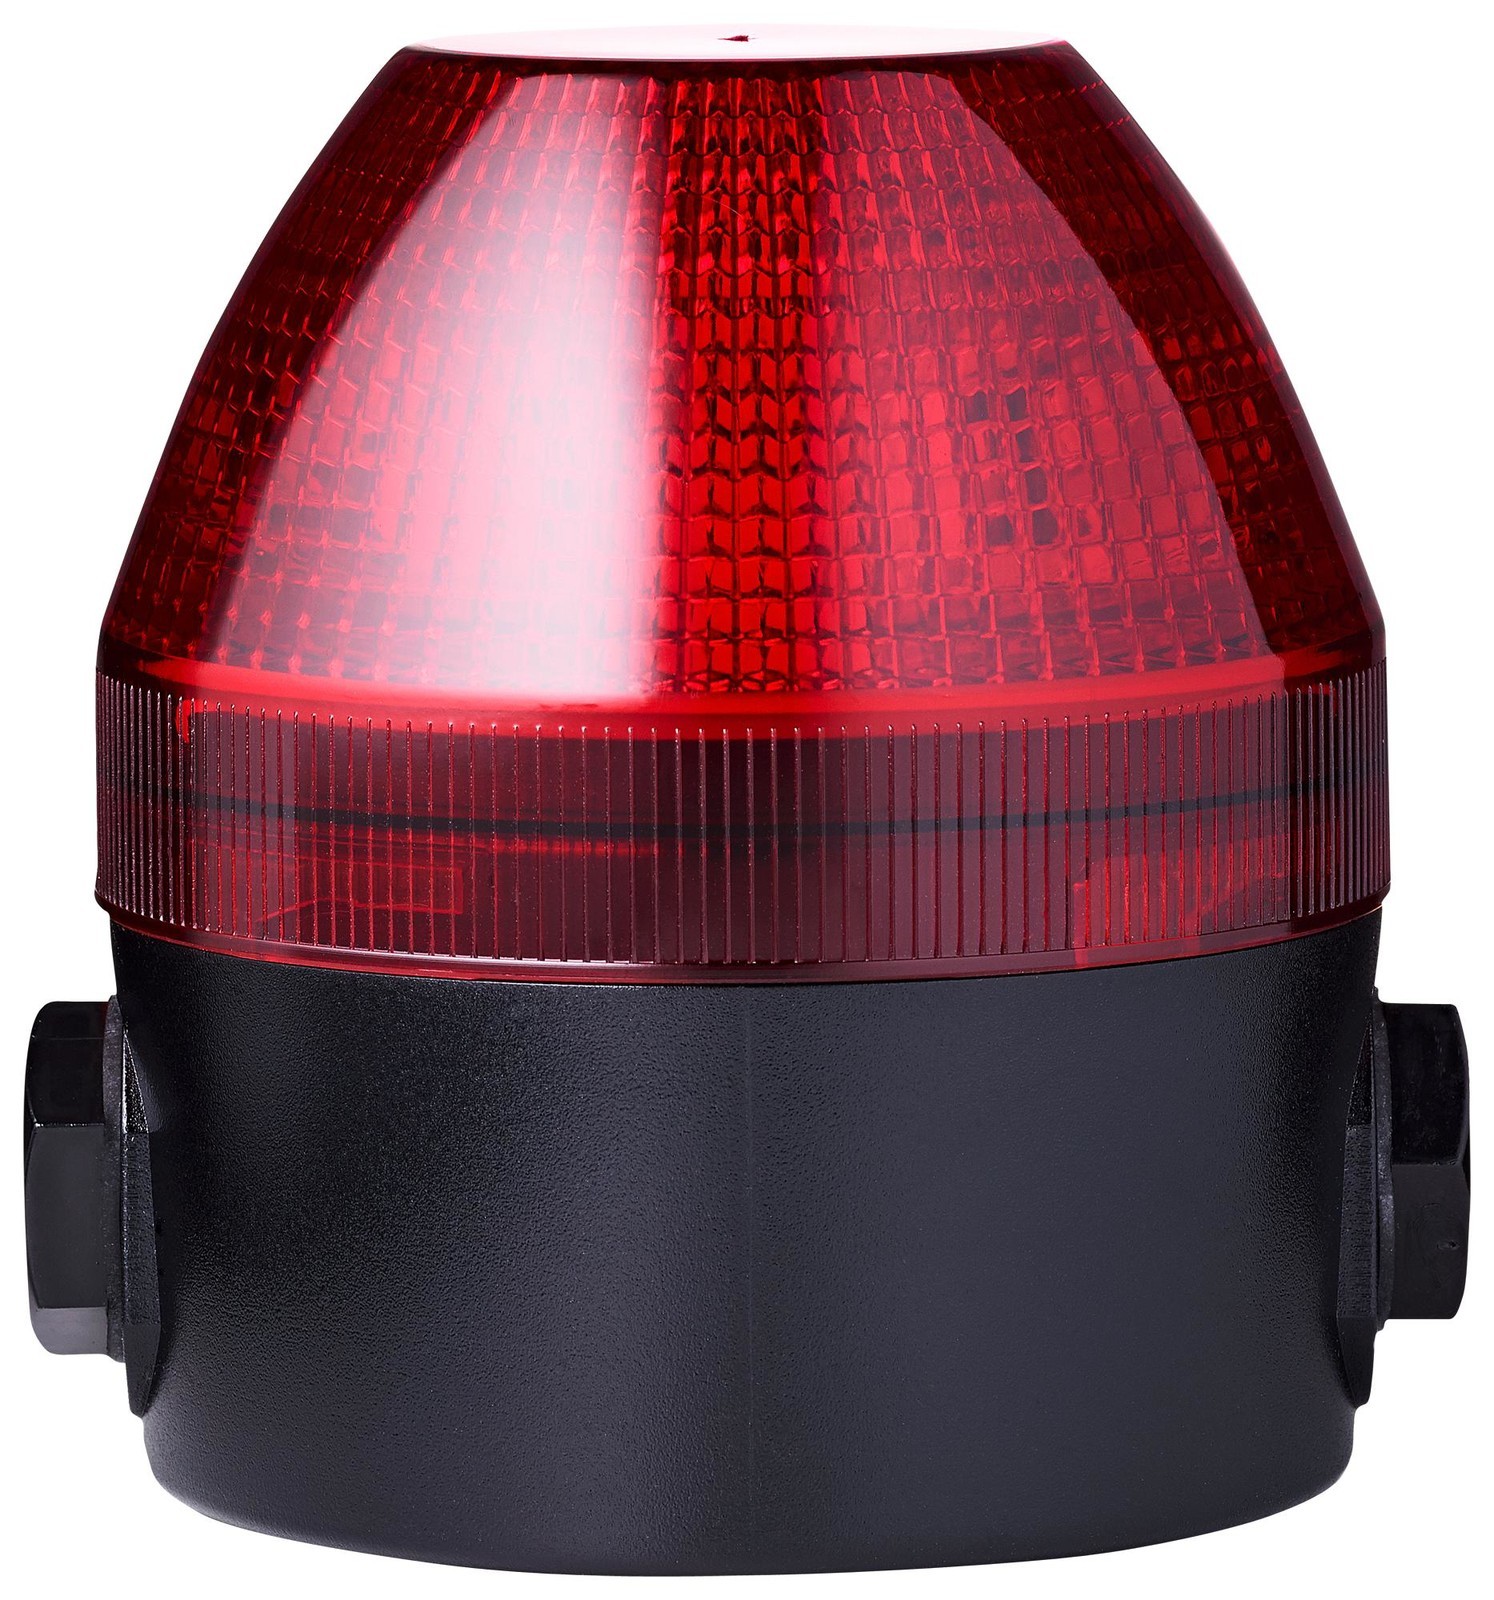 Auer Signal 440102408 Beacon, Flashing/steady, Red, 48V